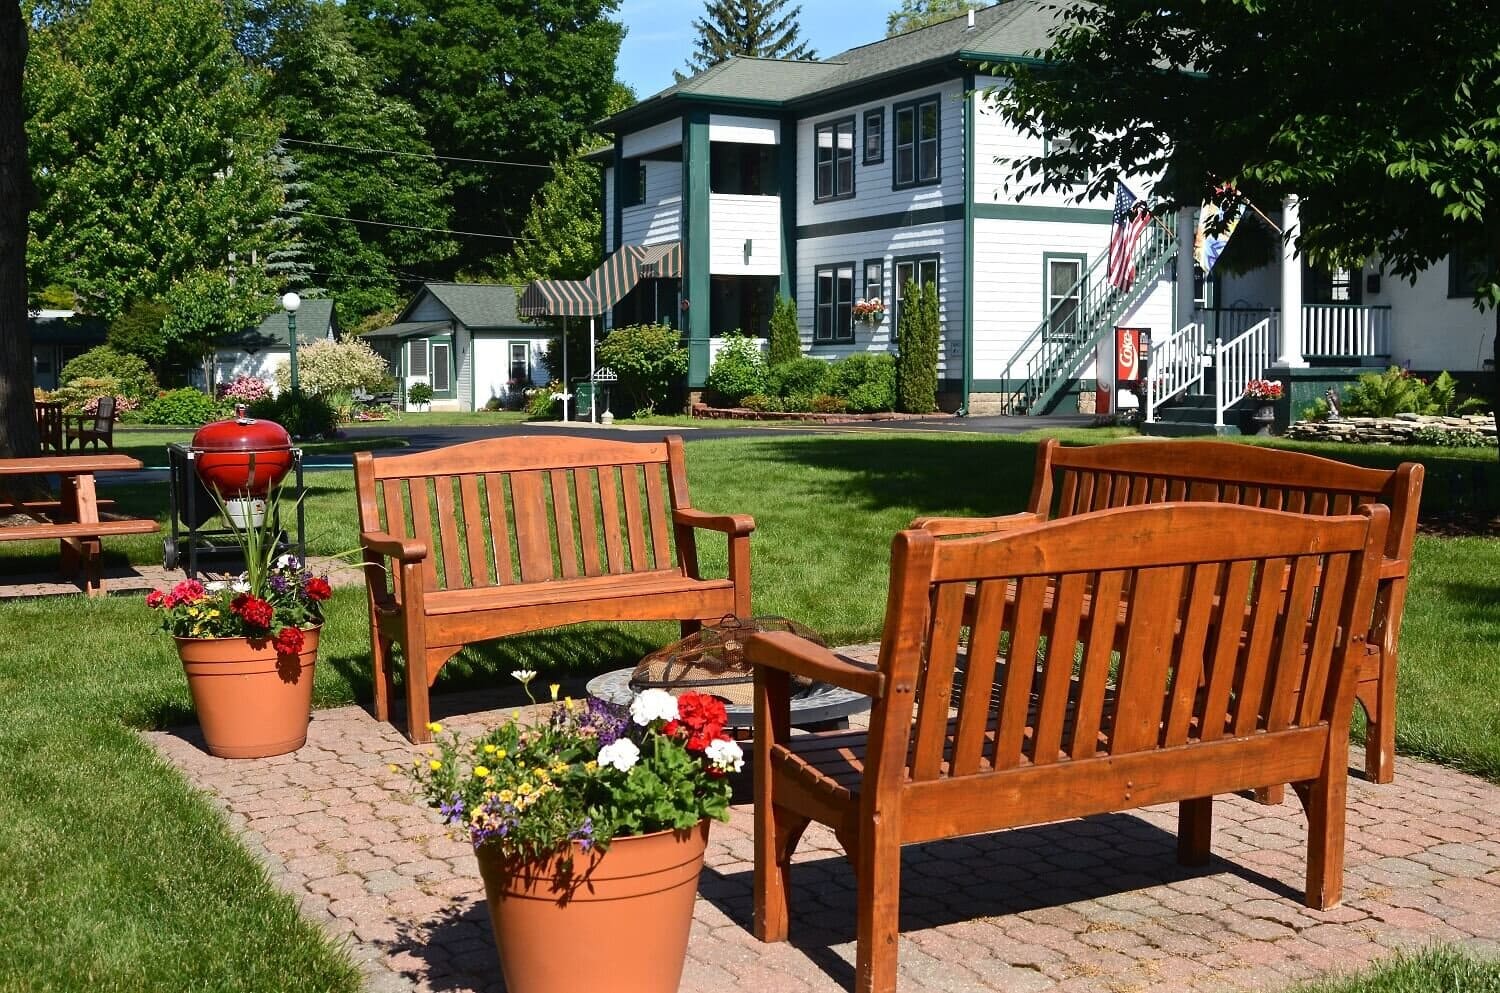 Victoria Resort Bed & Breakfast and Cottages